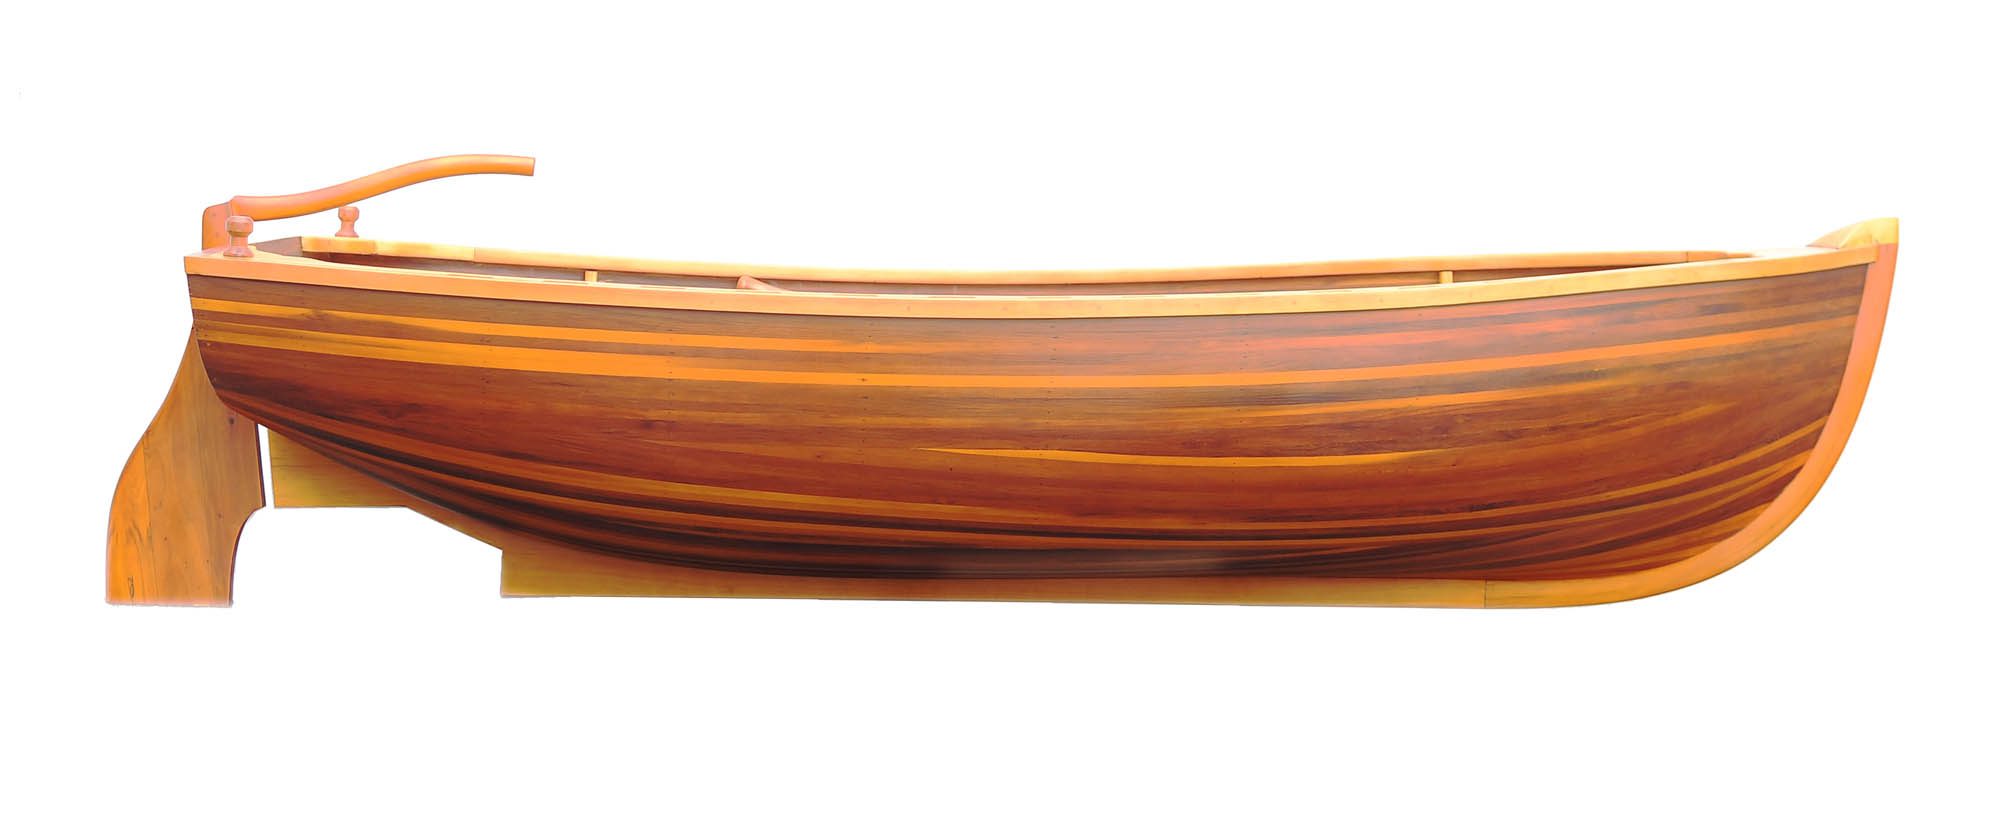 Wooden Boat Usa Wooden Boats Wooden Canoes Wooden Kayaks Dinghy